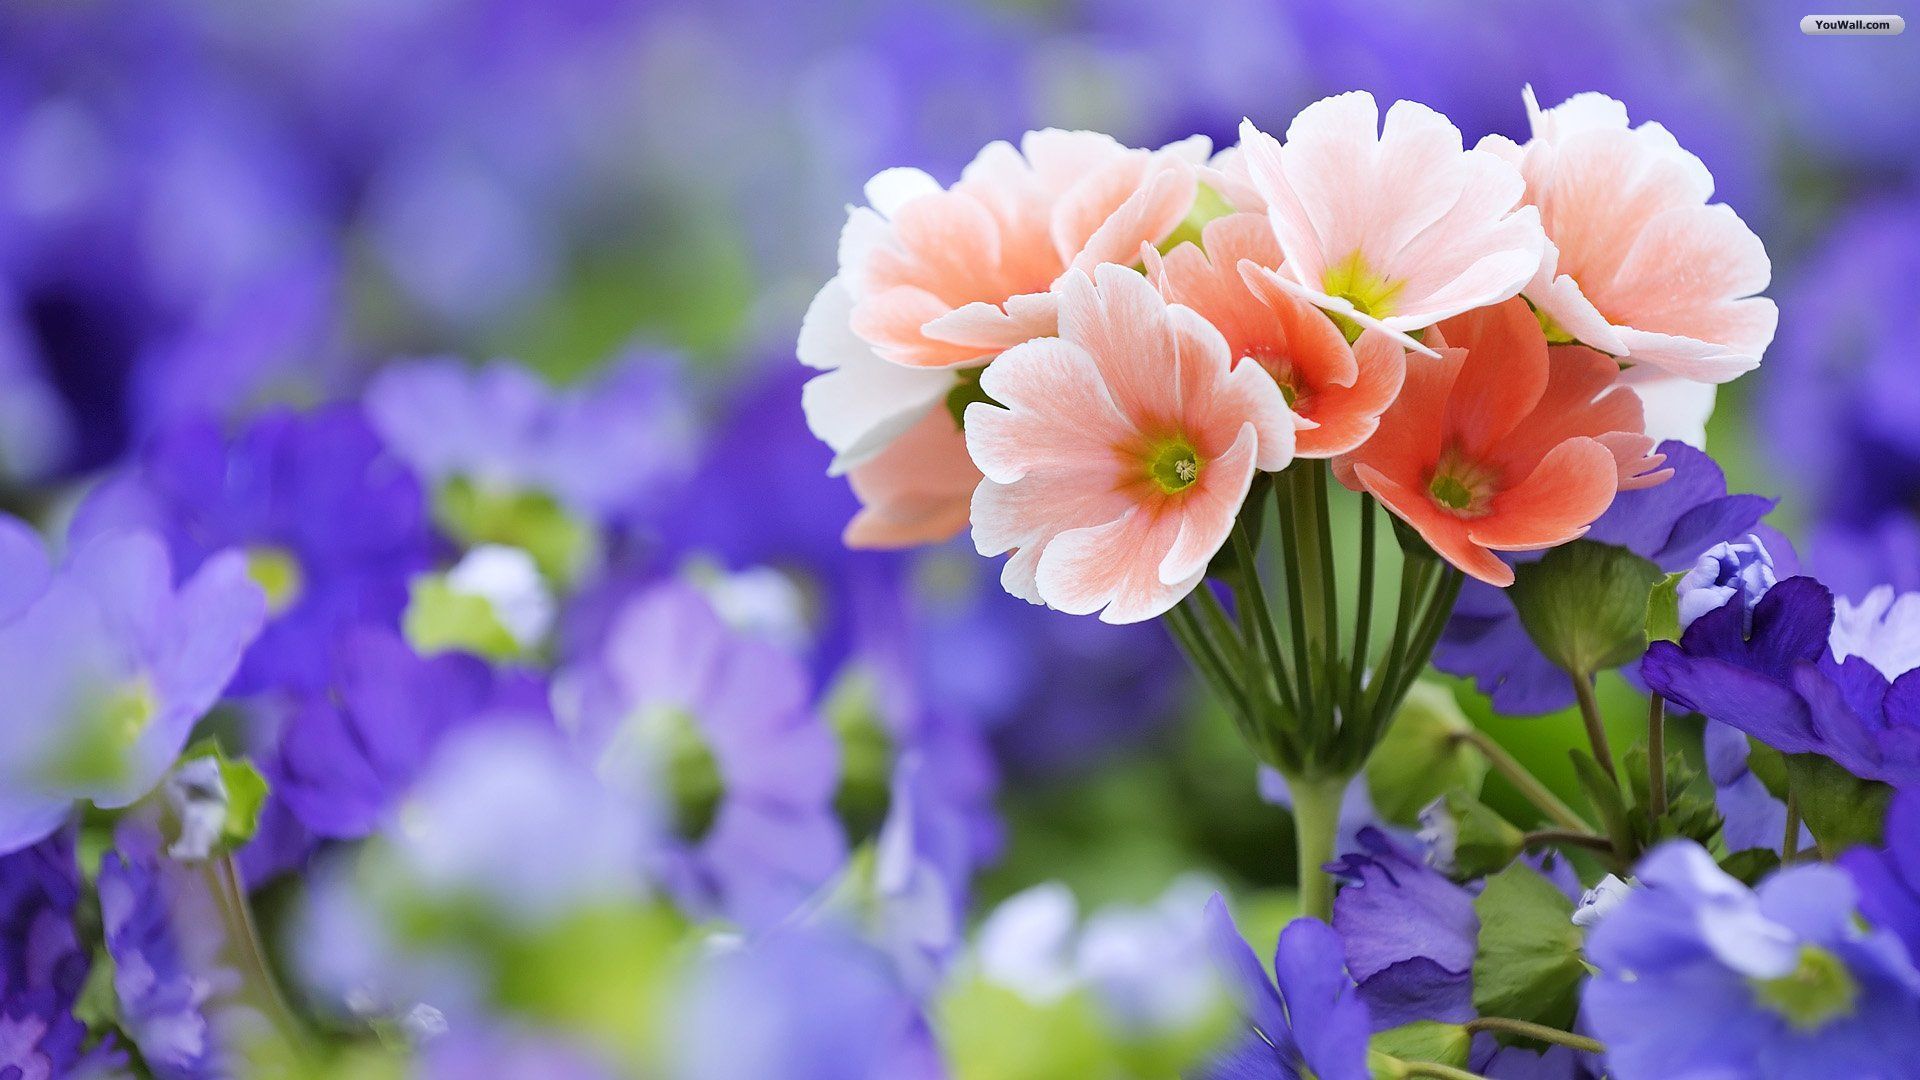 beautiful flower pictures and wallpapers Download